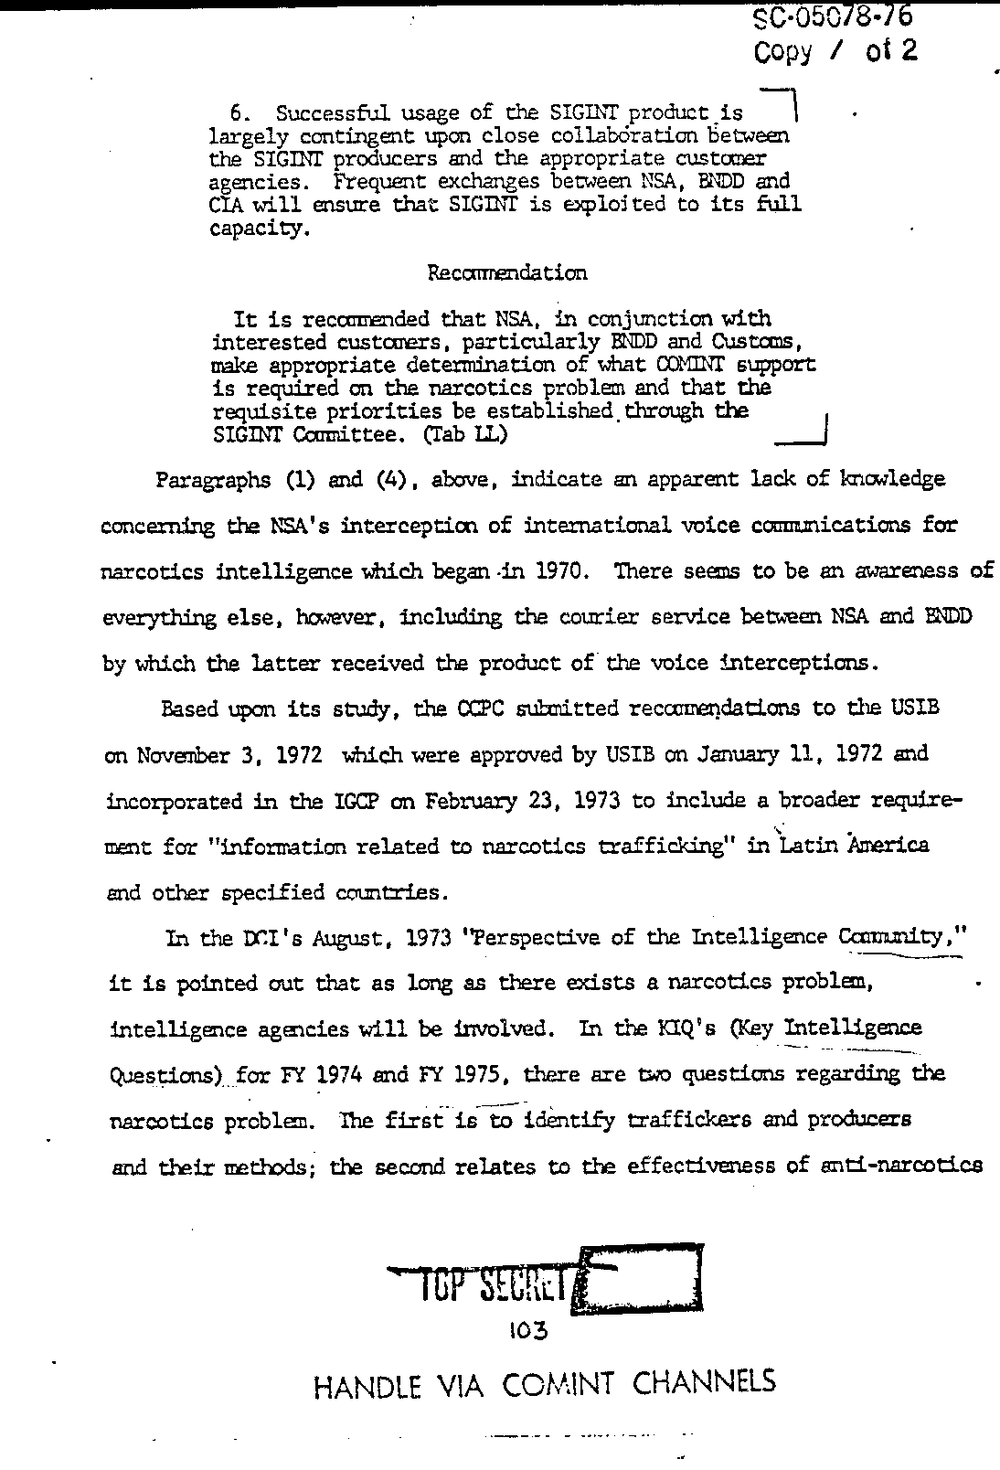 Page 111 from Report on Inquiry Into CIA Related Electronic Surveillance Activities